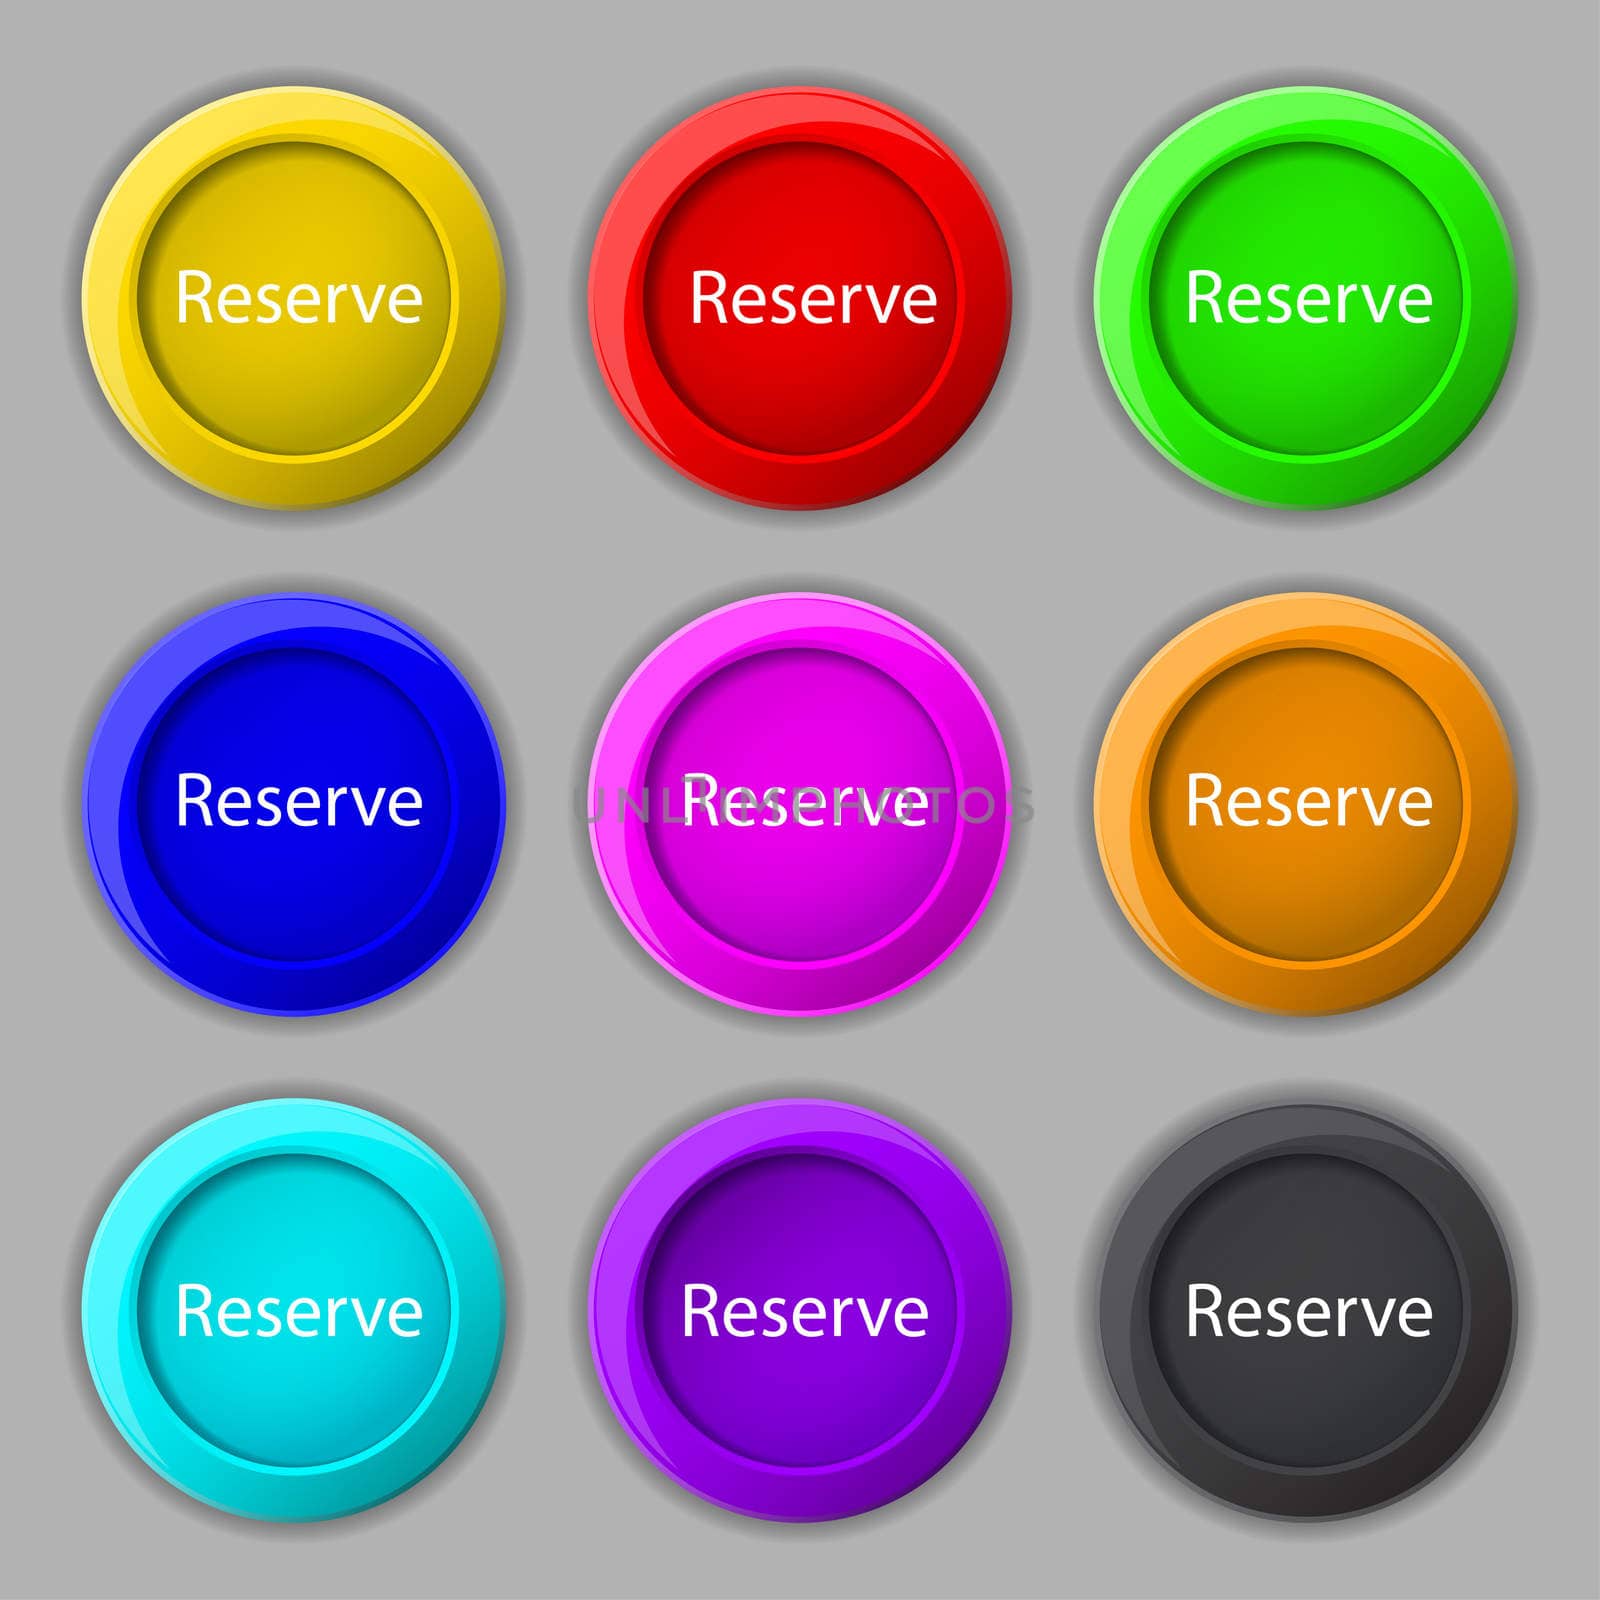 Reserved sign icon. Set of colored buttons. illustration